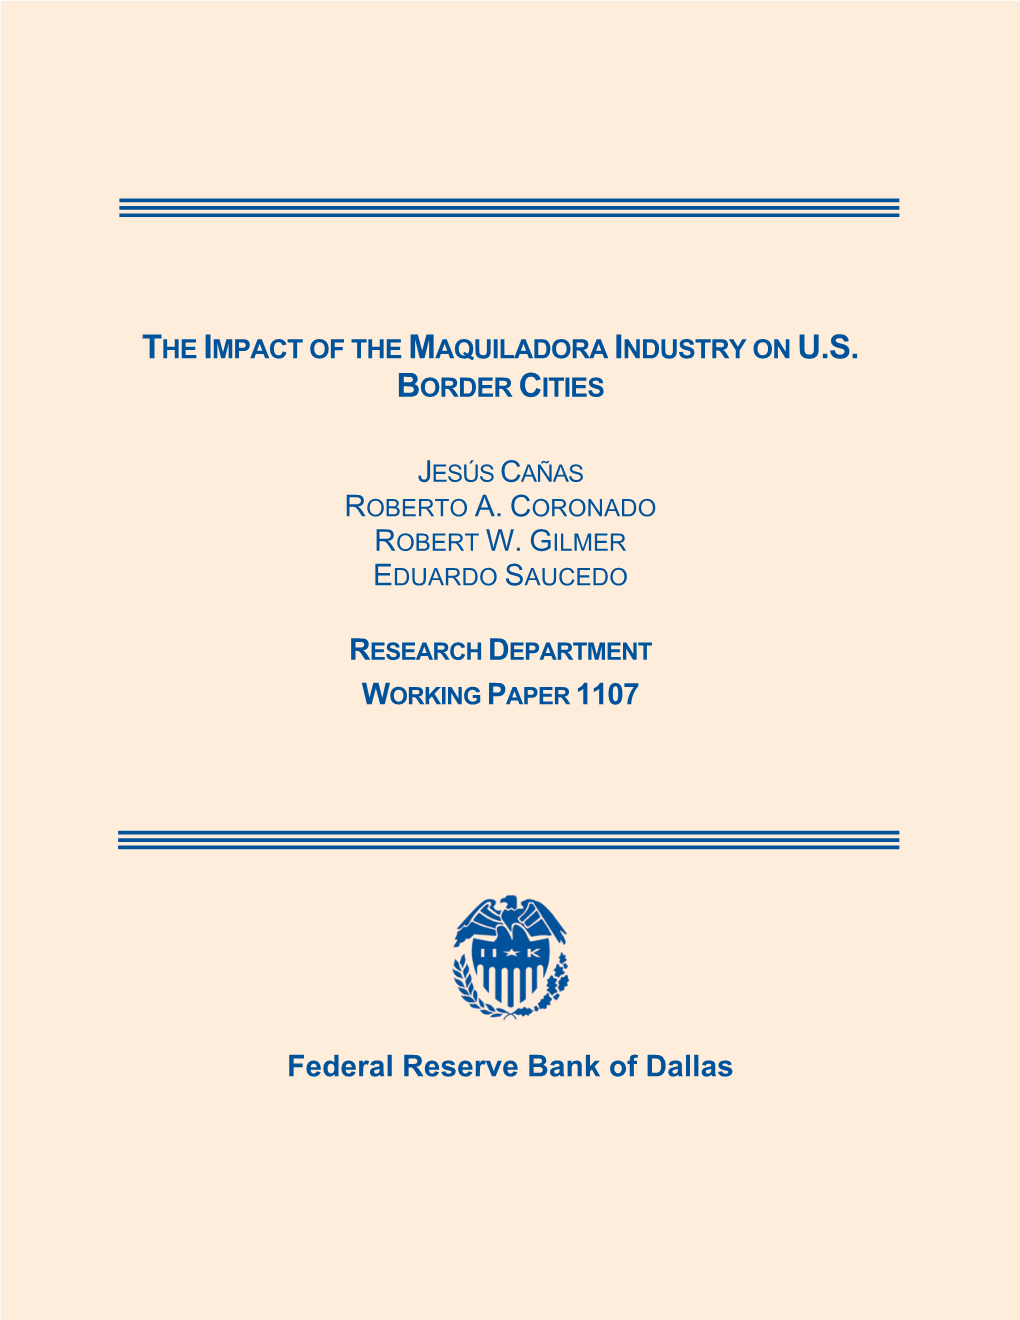 The Impact of the Maquiladora Industry on US Border Cities